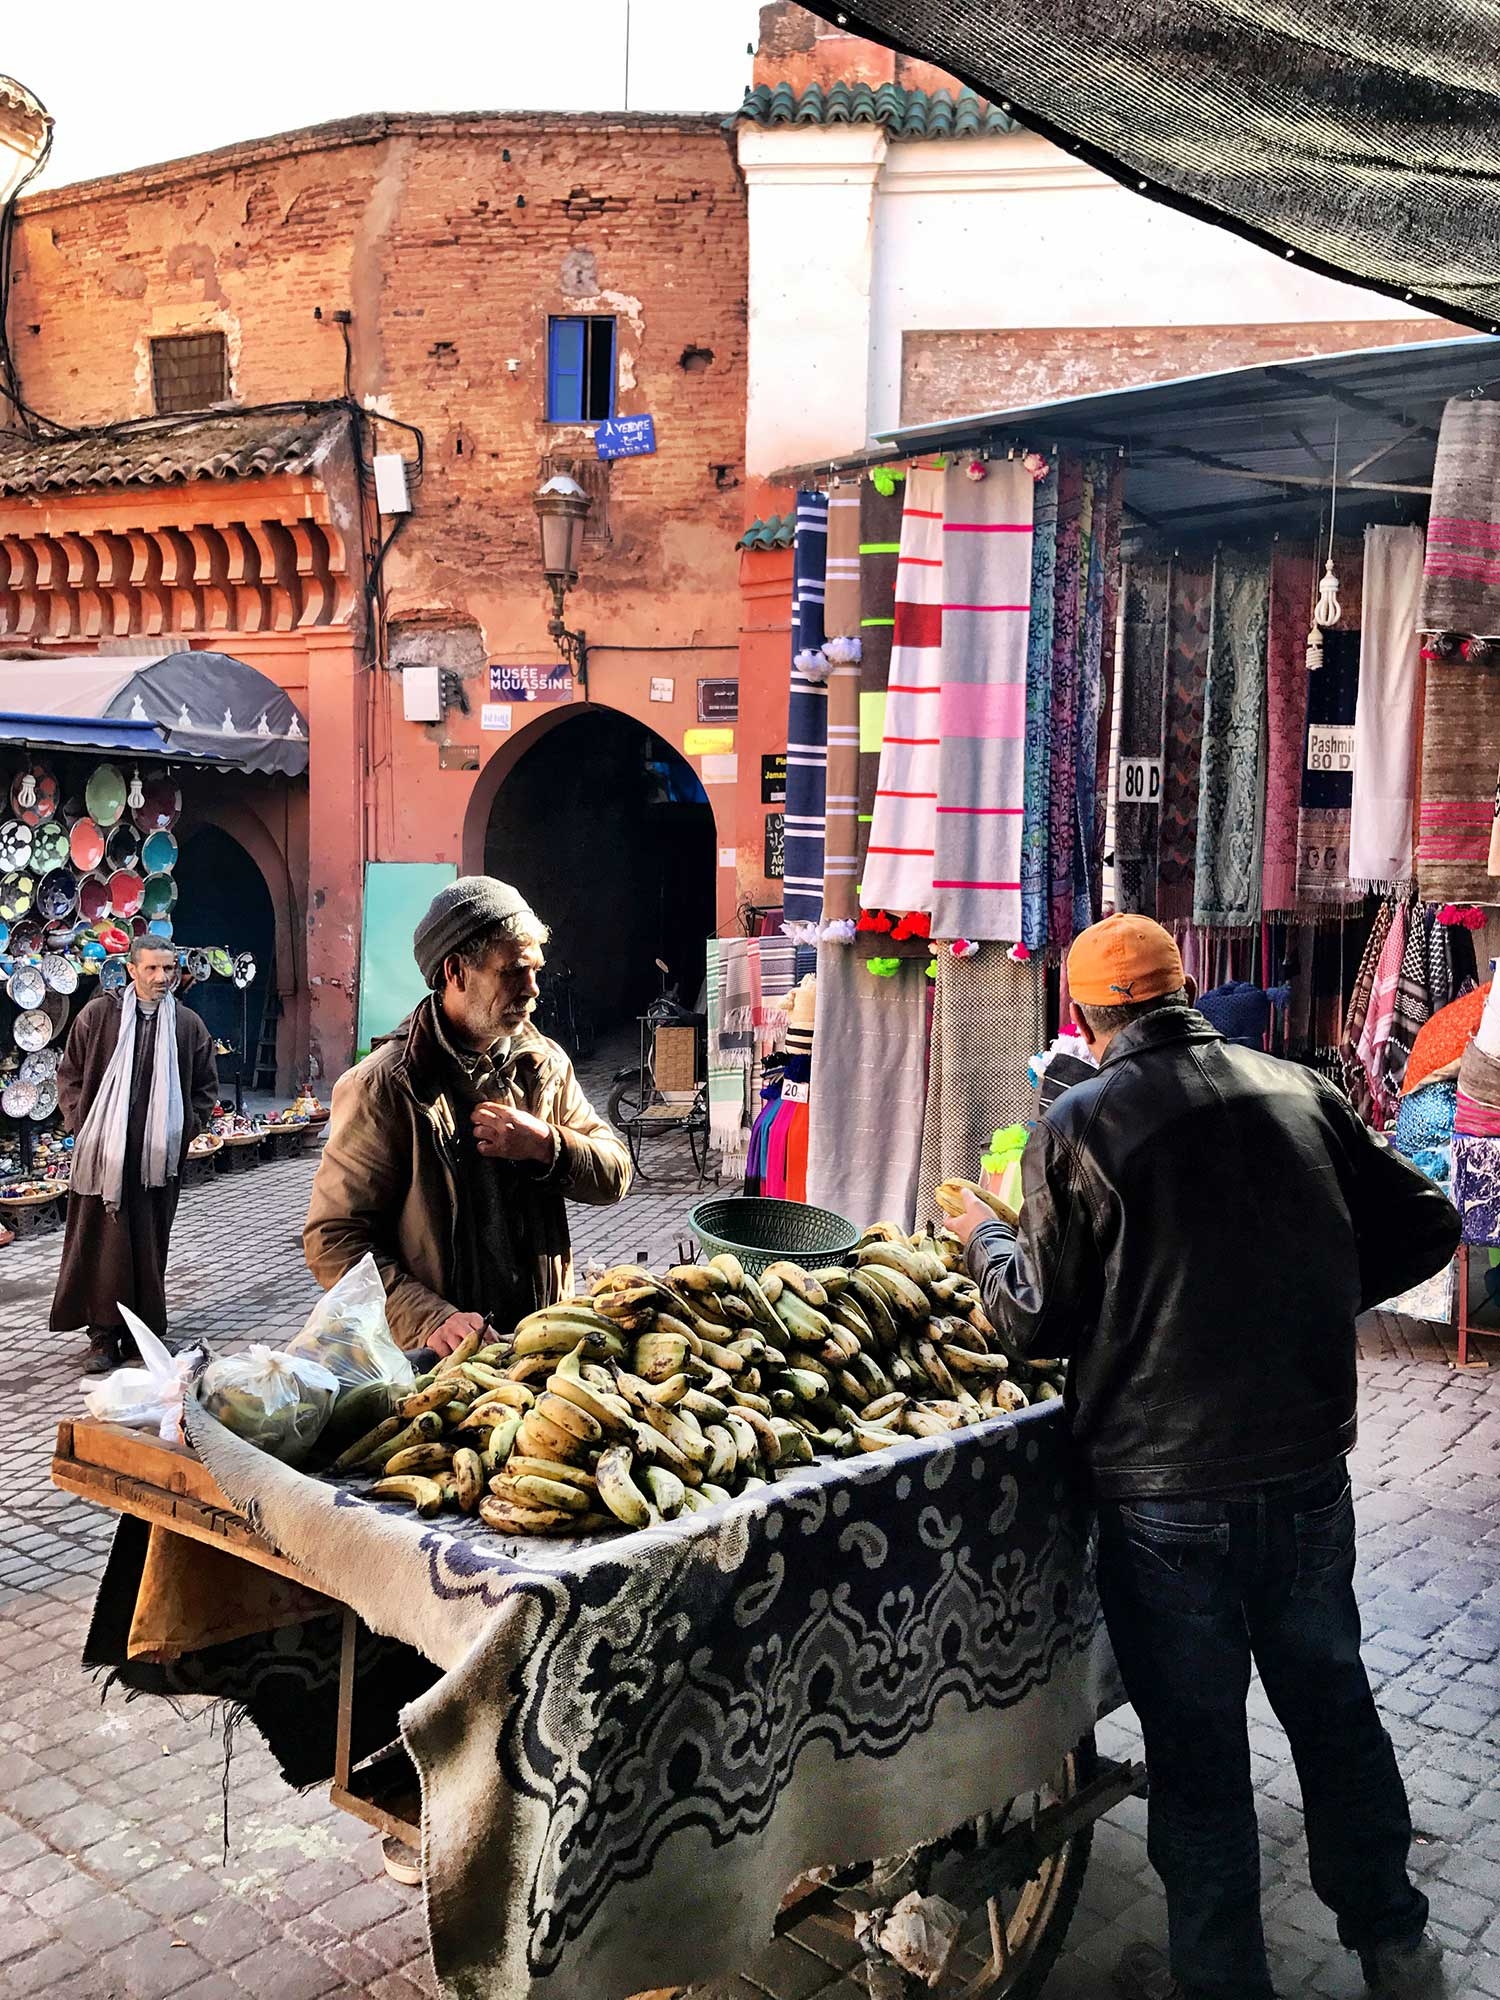 A man sells bananas on a large table in the laneways of the souks 